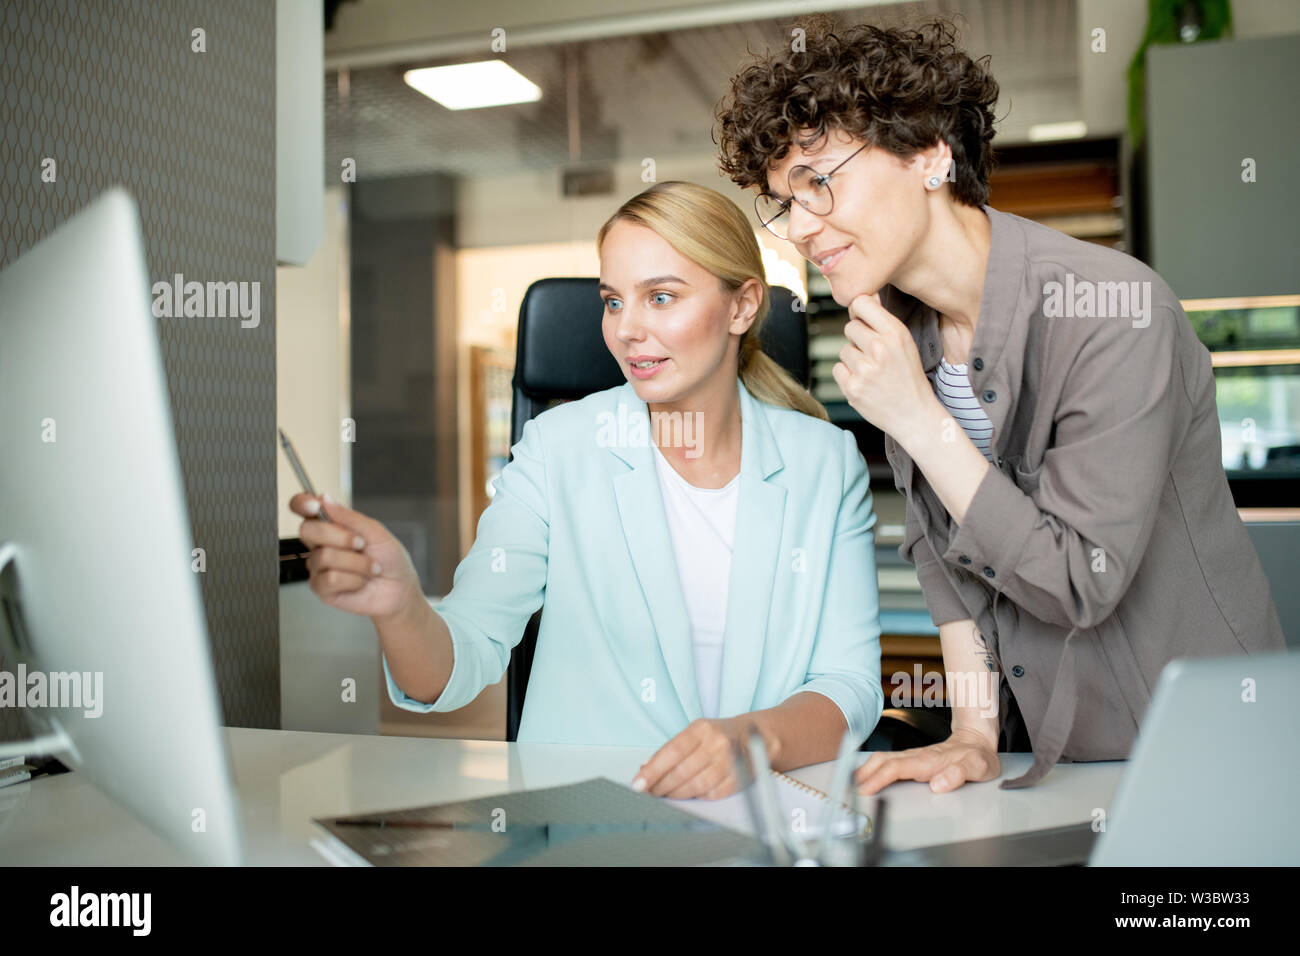 One of young designers explaining stuff on computer screen Stock Photo